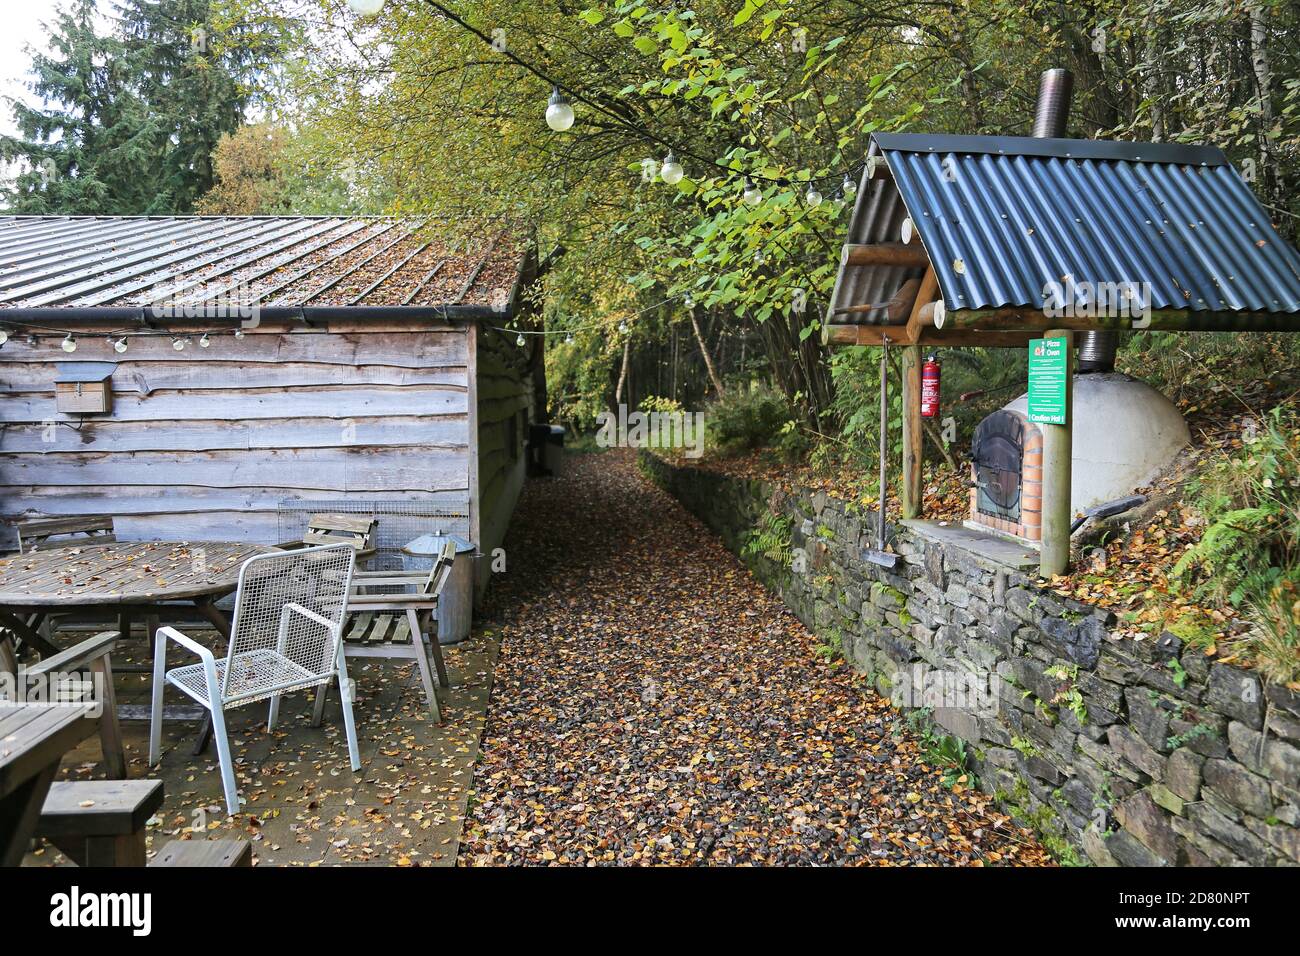 Pizza oven and communal eating area, Celtic Woodland Holidays, Road Wood, Builth Wells, Brecknockshire, Powys, Wales, Great Britain, UK, Europe Stock Photo